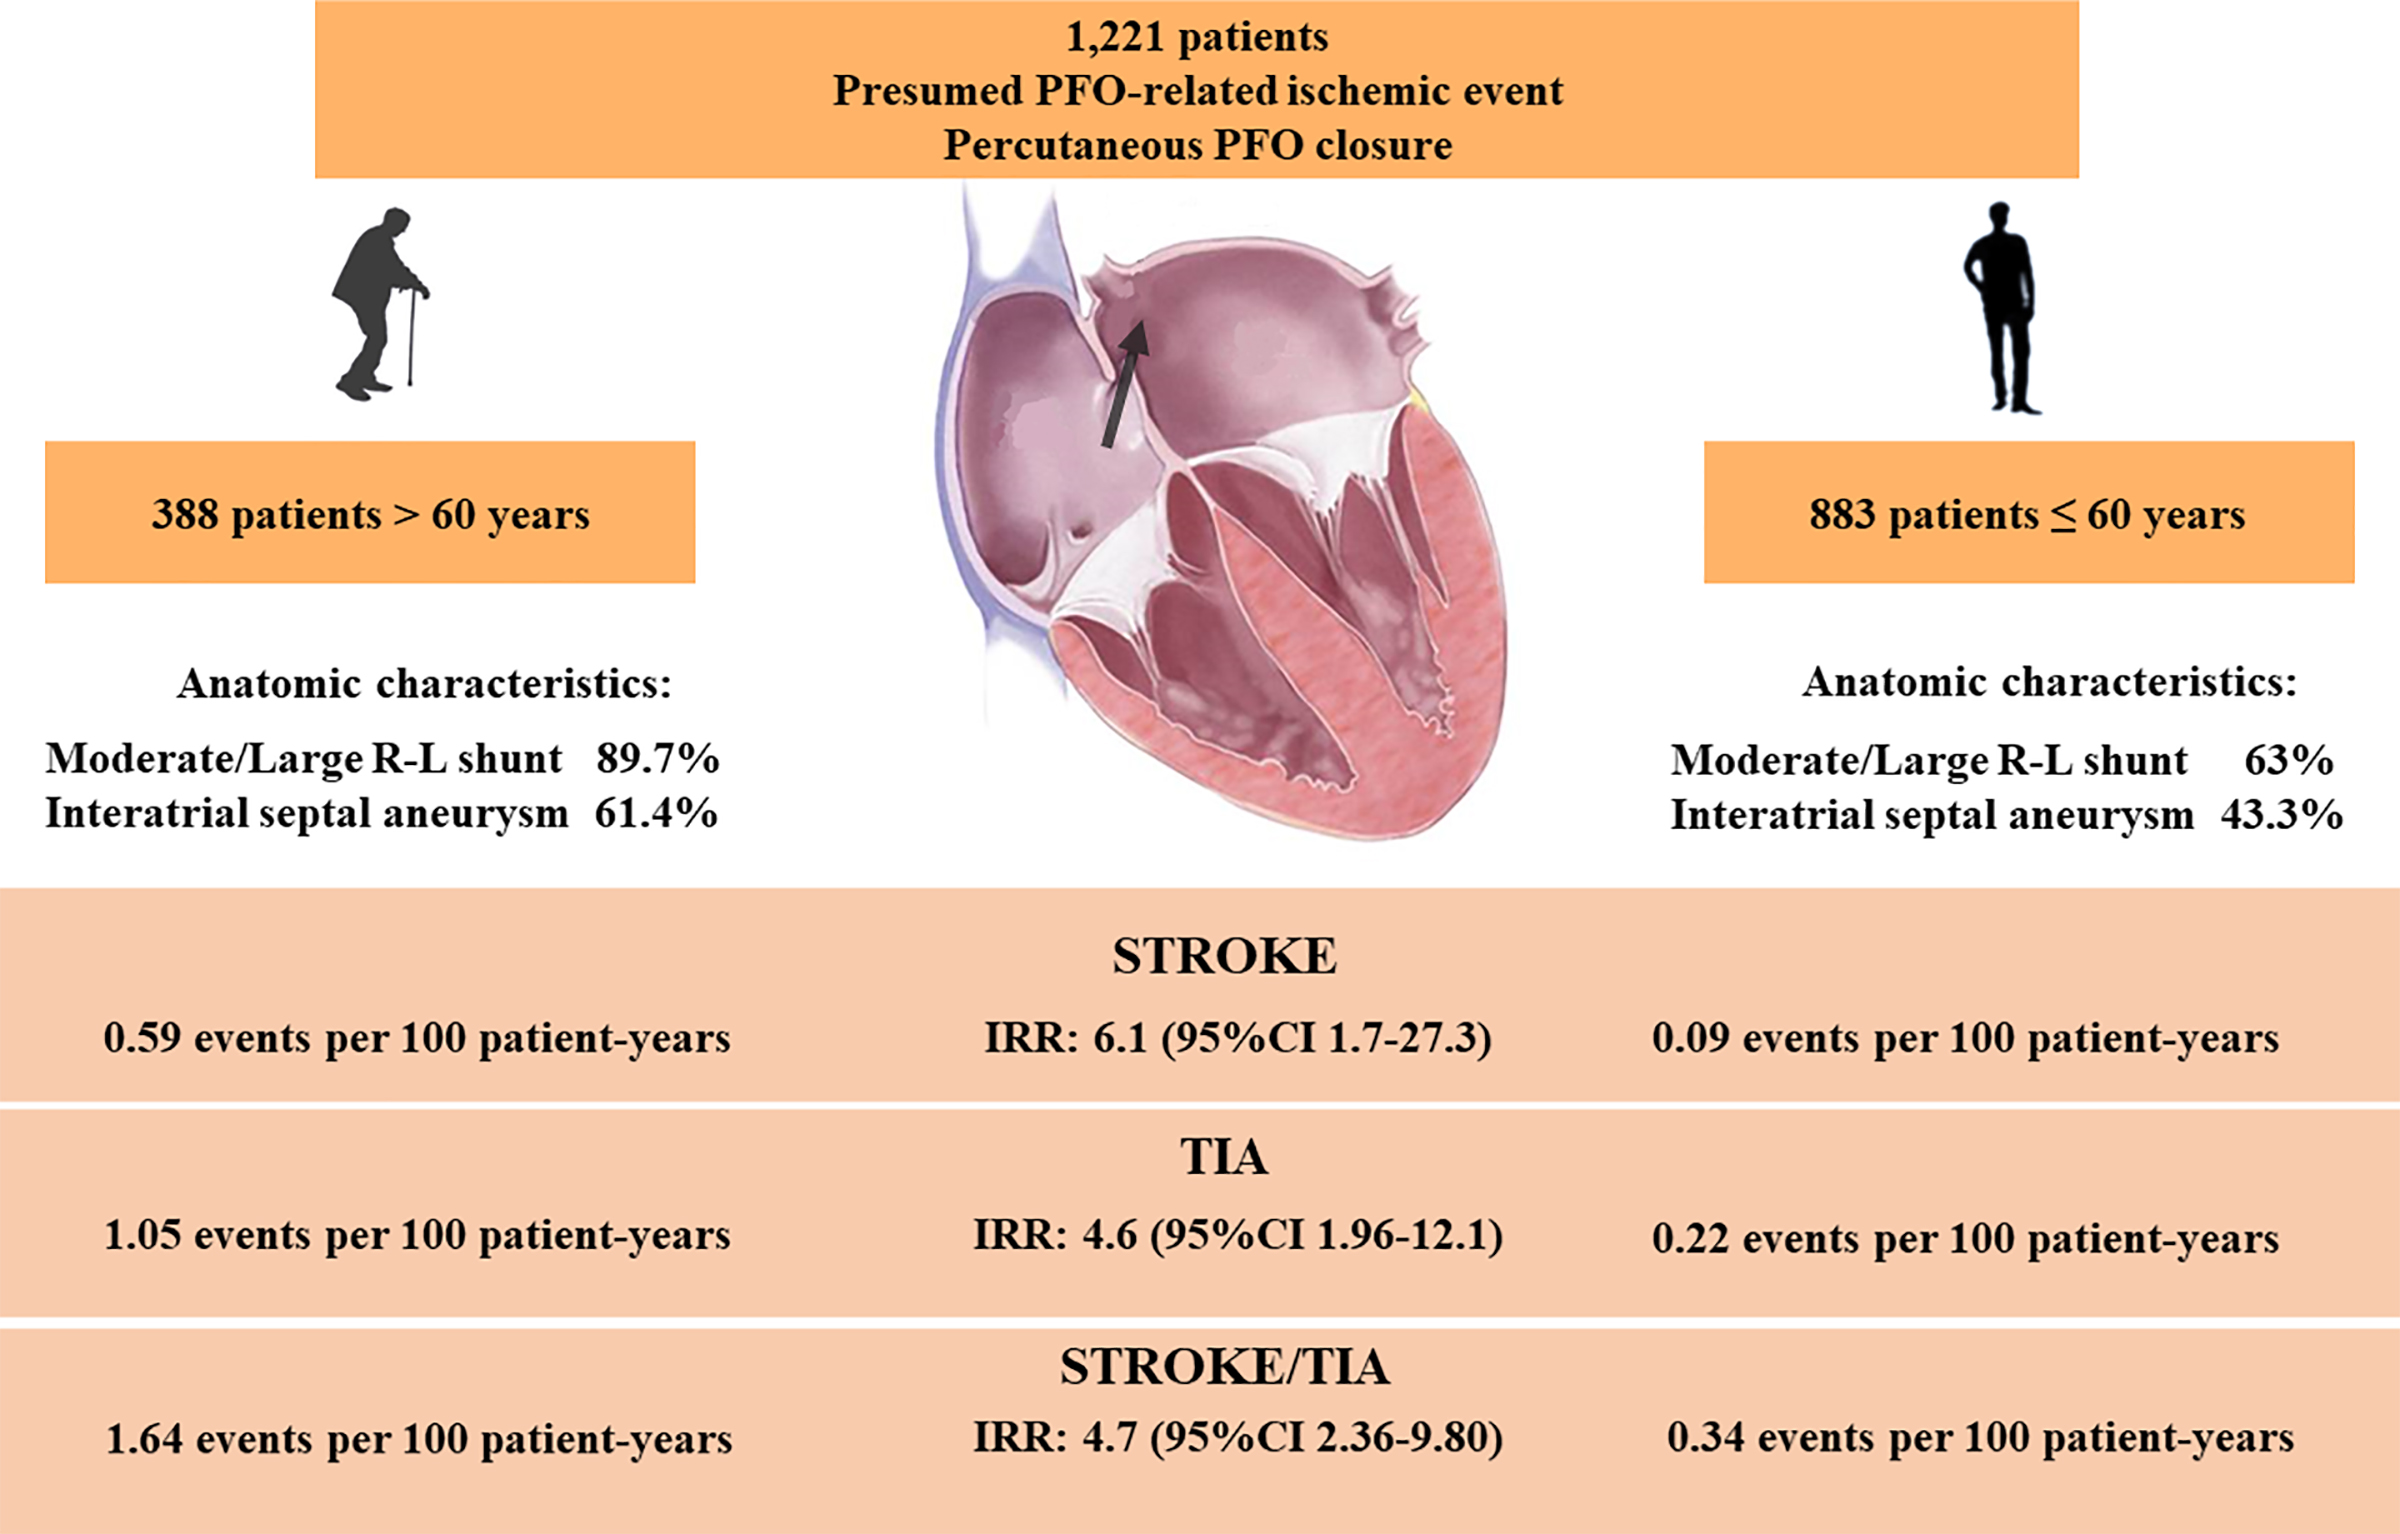 Transcatheter Closure of Patent Foramen Ovale in Older Patients With Cryptogenic Thromboembolic Events